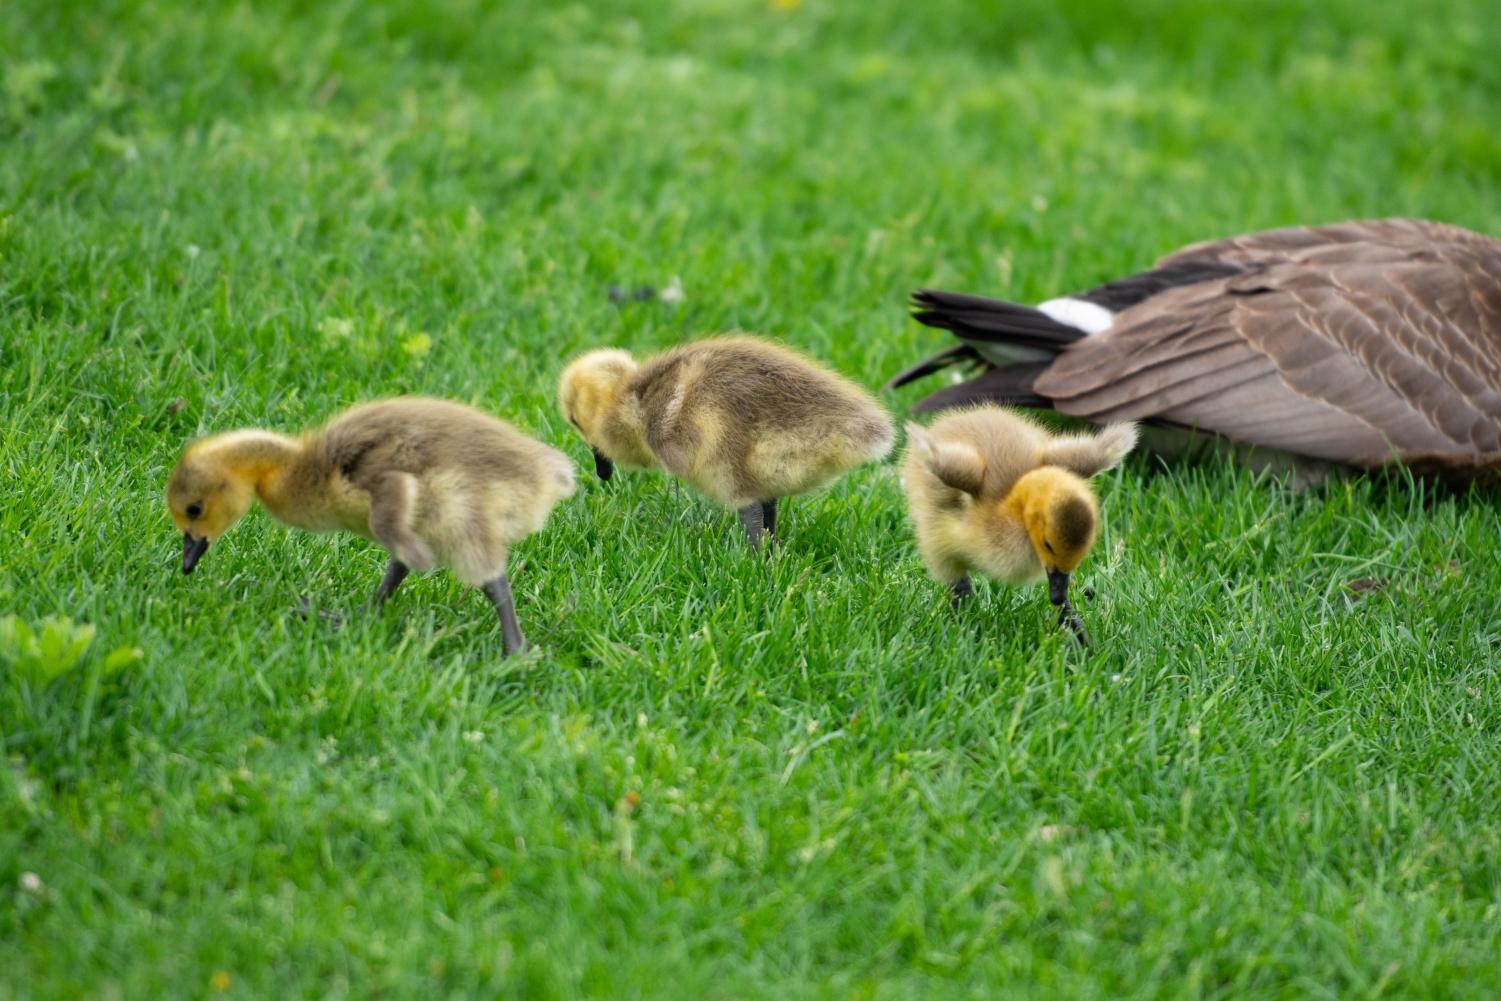 Three young goslings walk on grass near a goose.